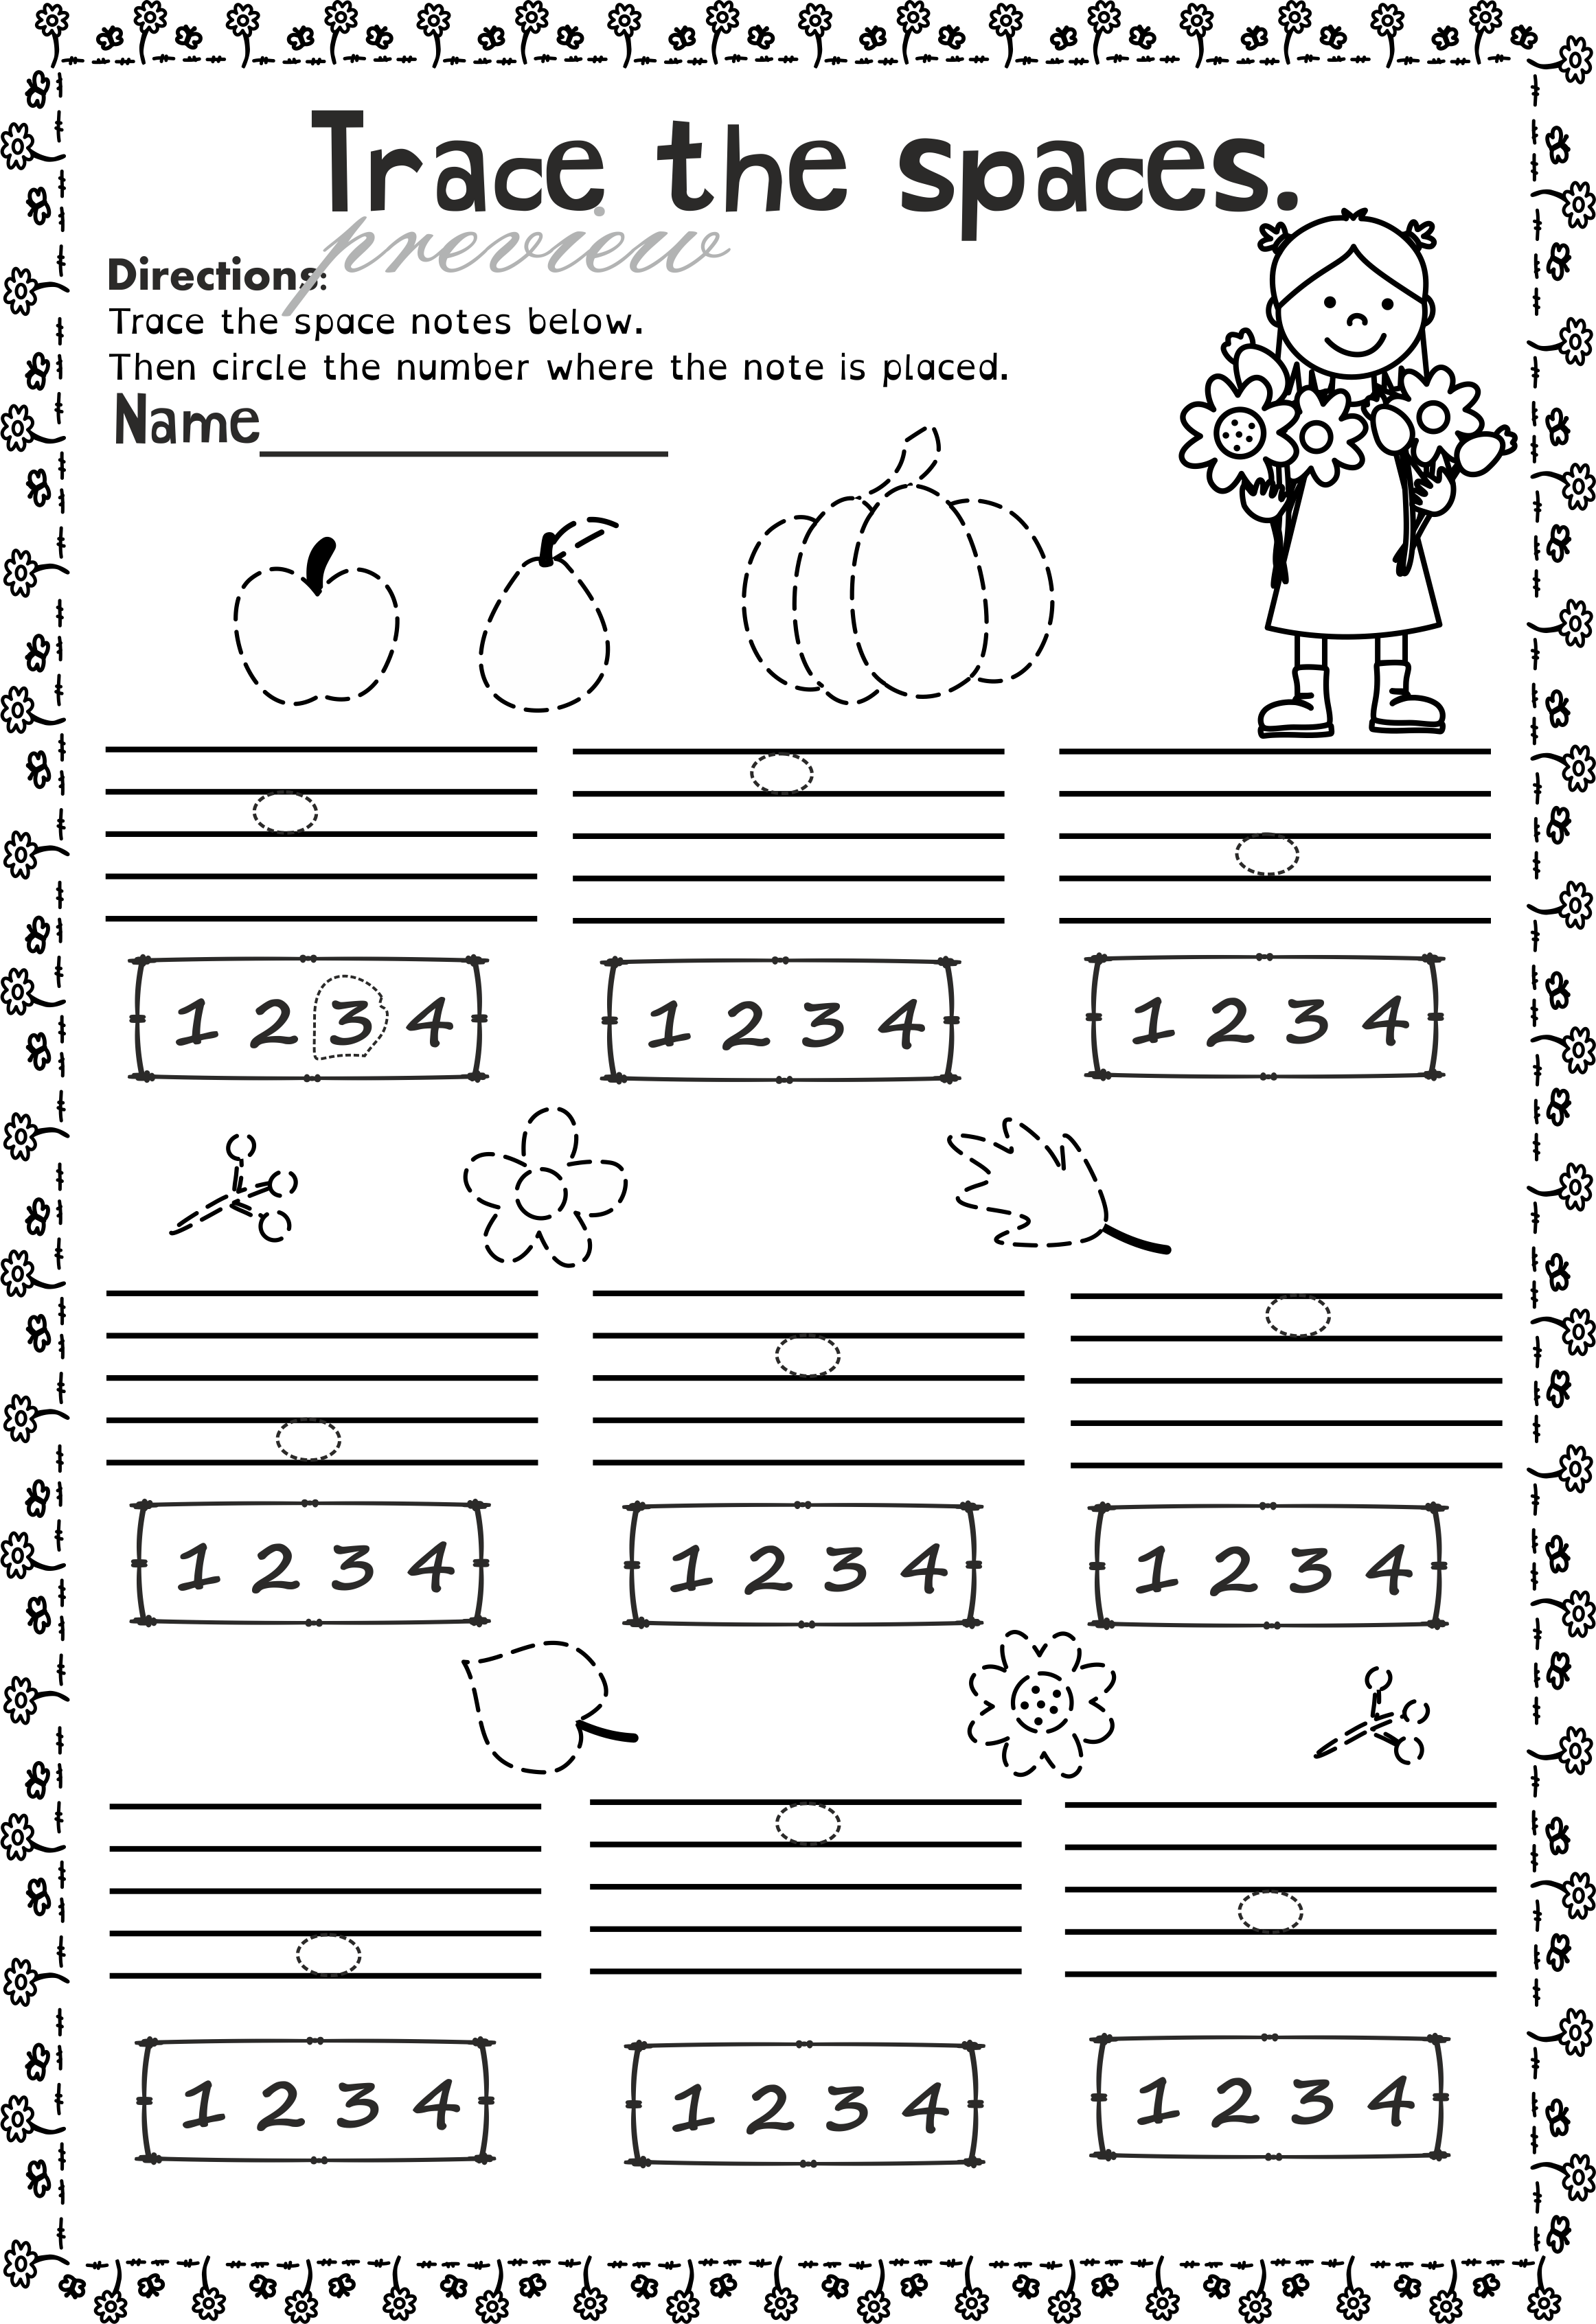 Xylophone clipart preschool music. Fall worksheets pack line